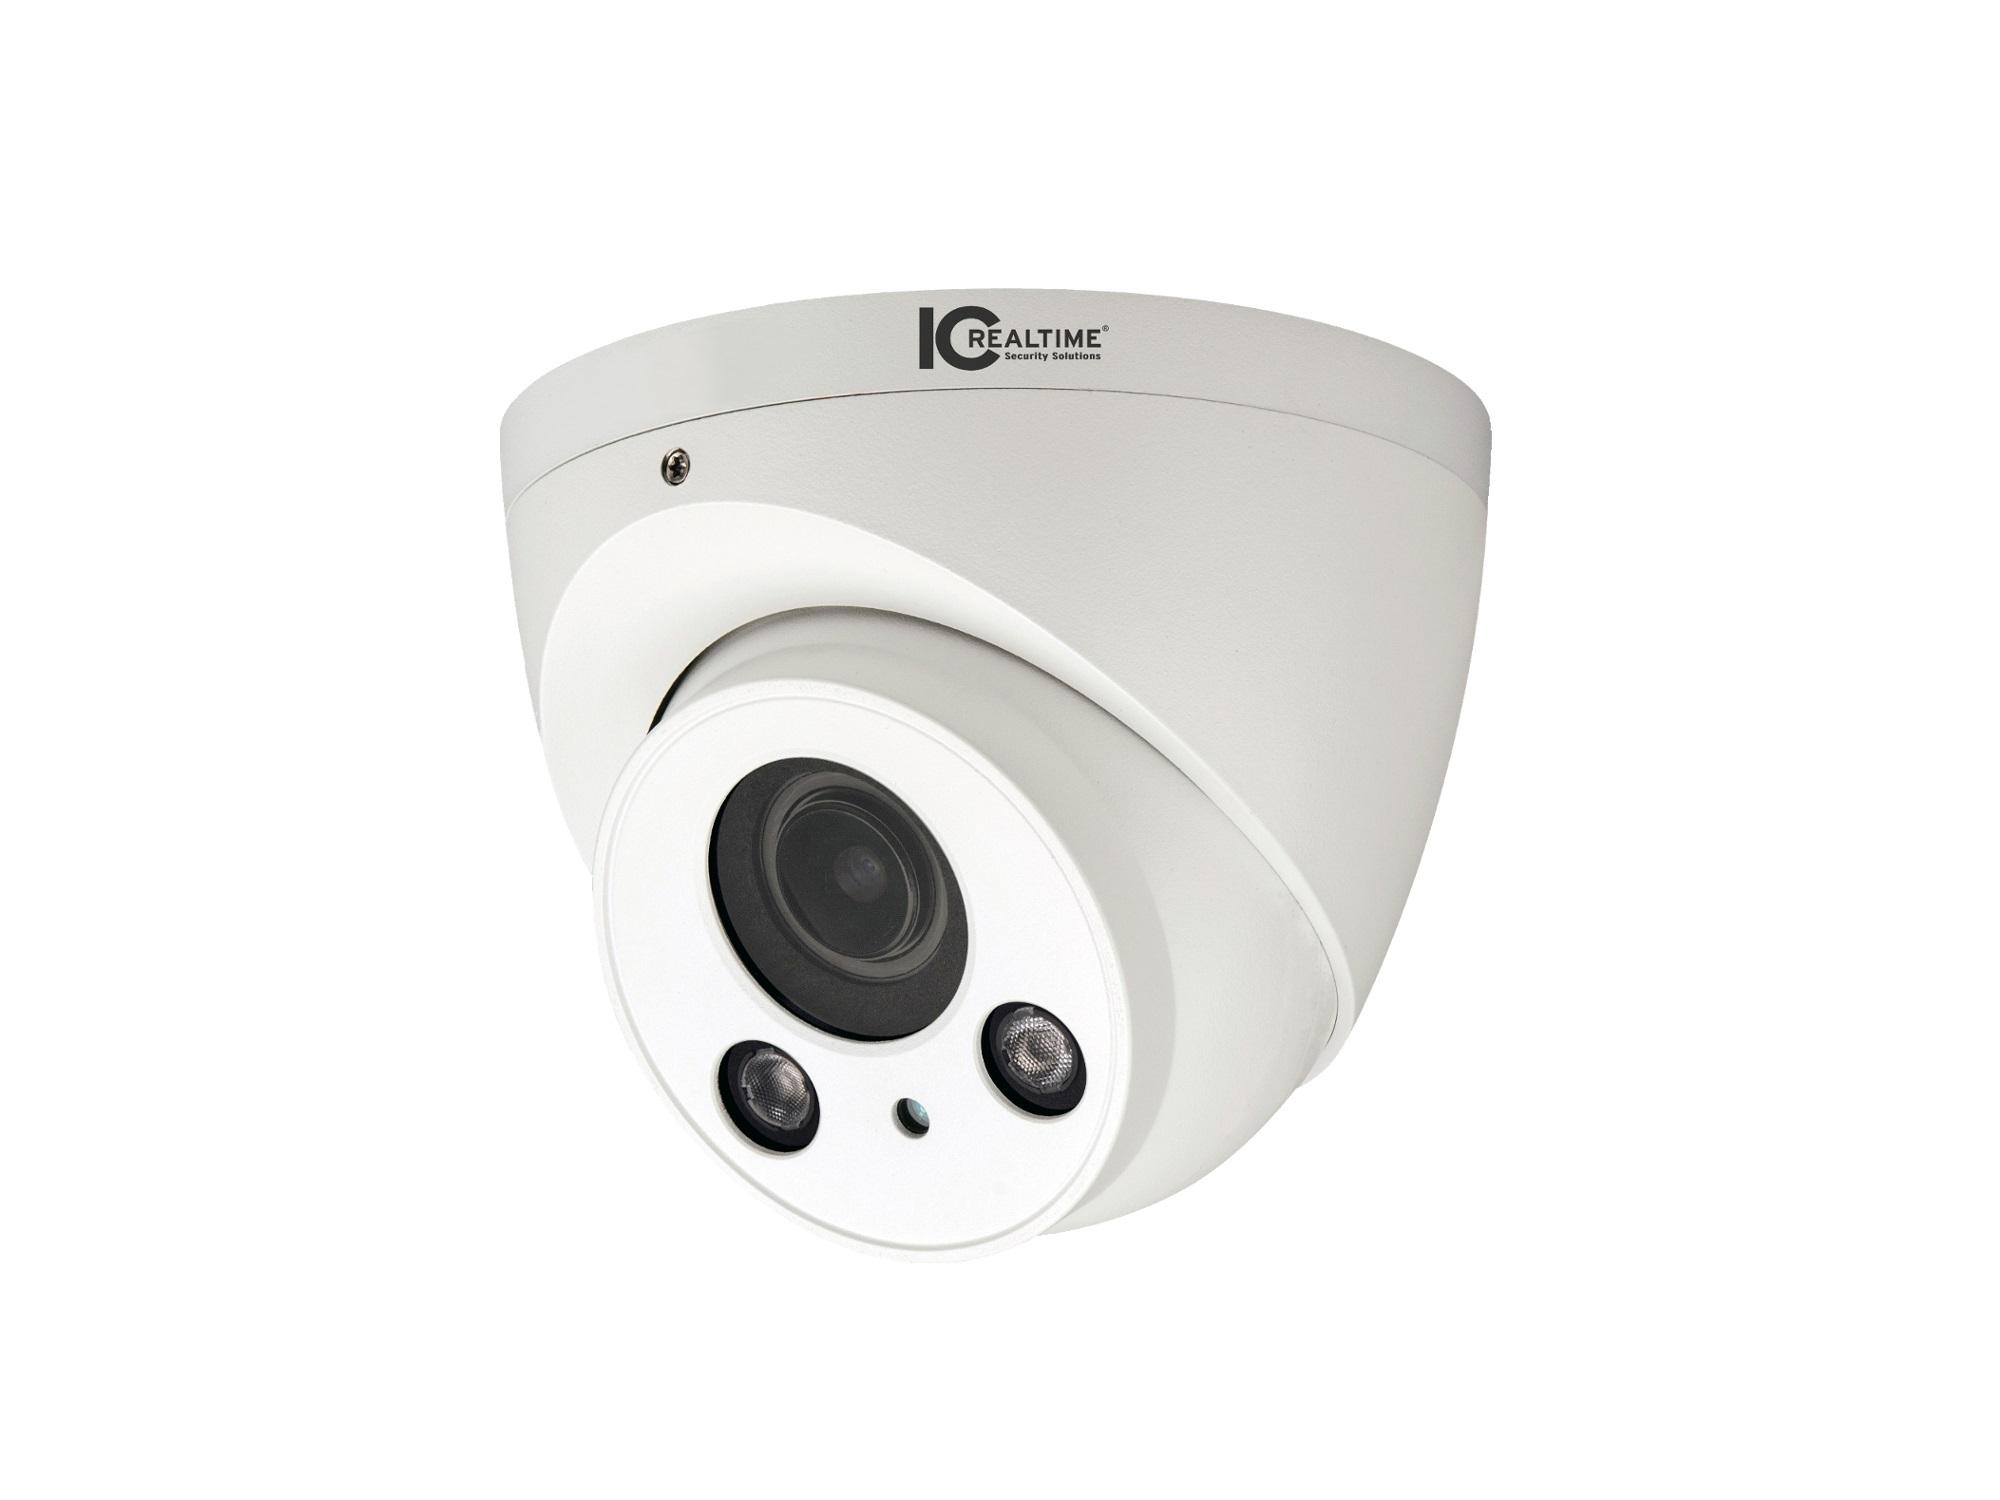 ICR-300H4W 2 MP Indoor/Outdoor Mid-Size IR HDAVS Dome Camera/White by ICRealtime